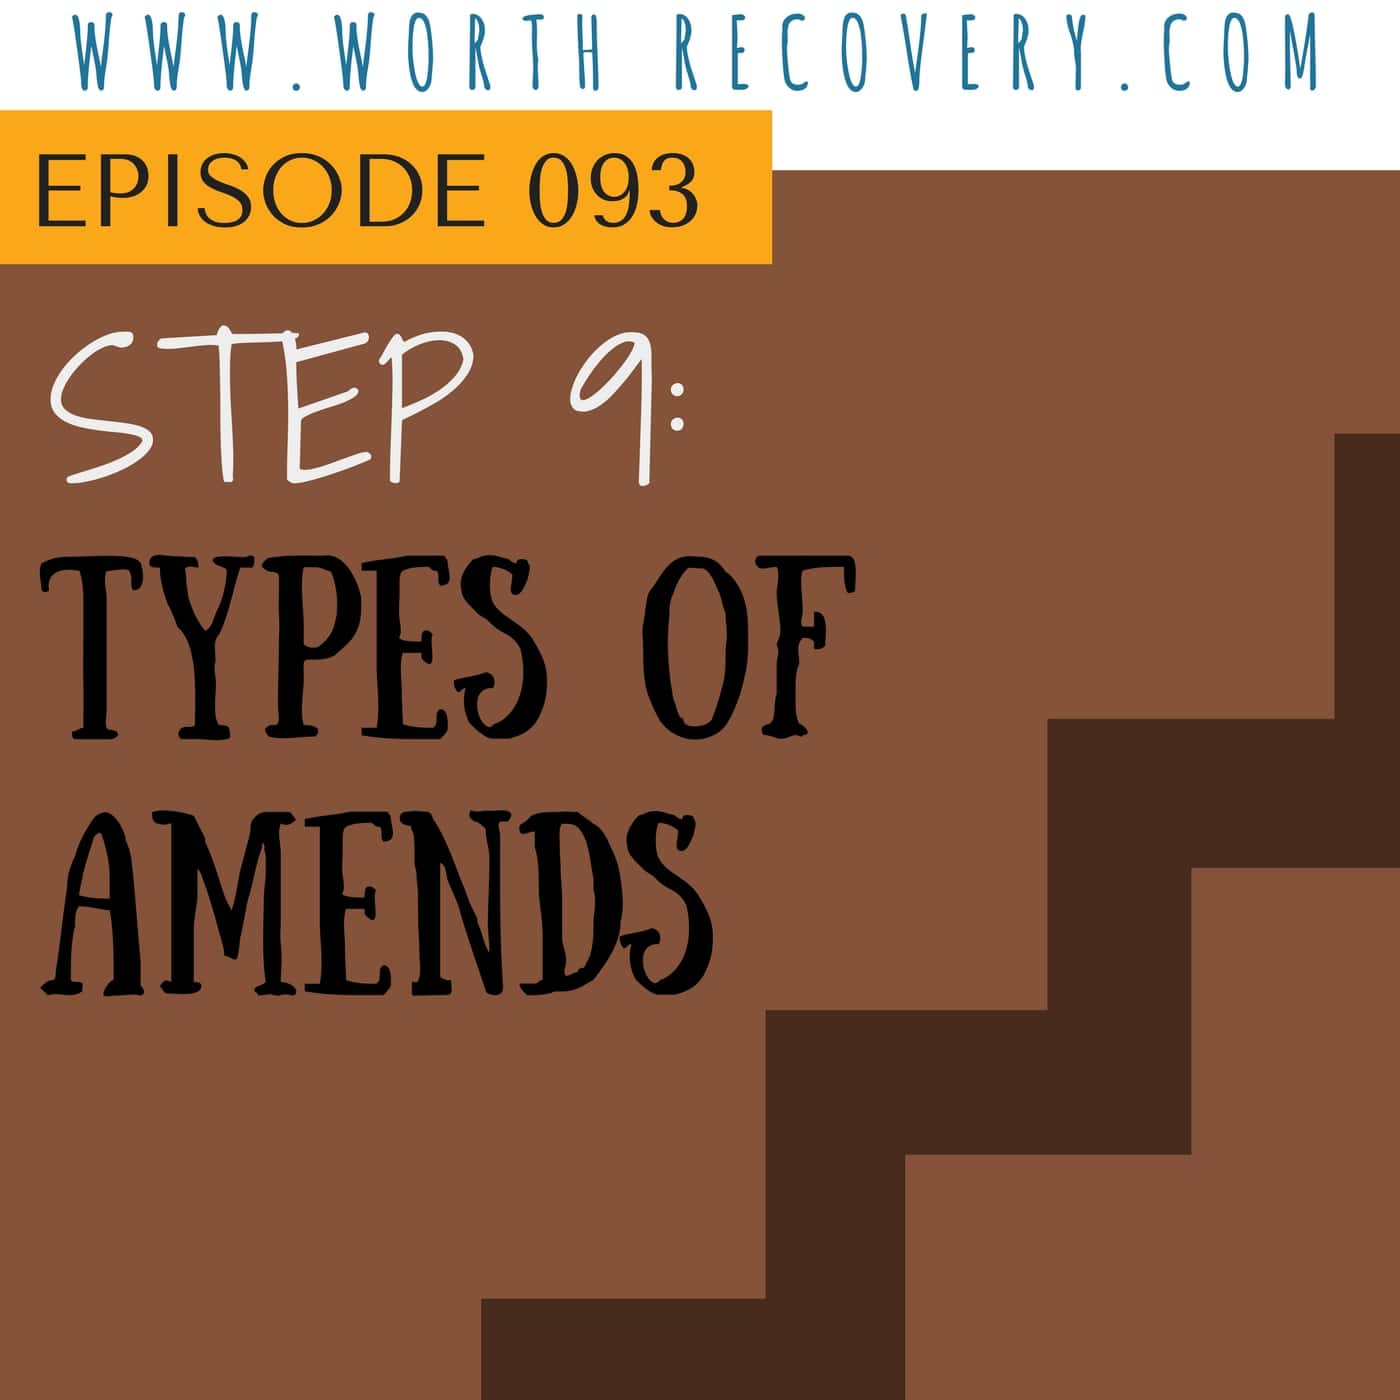 Episode 093: Step 9 - Types of Amends